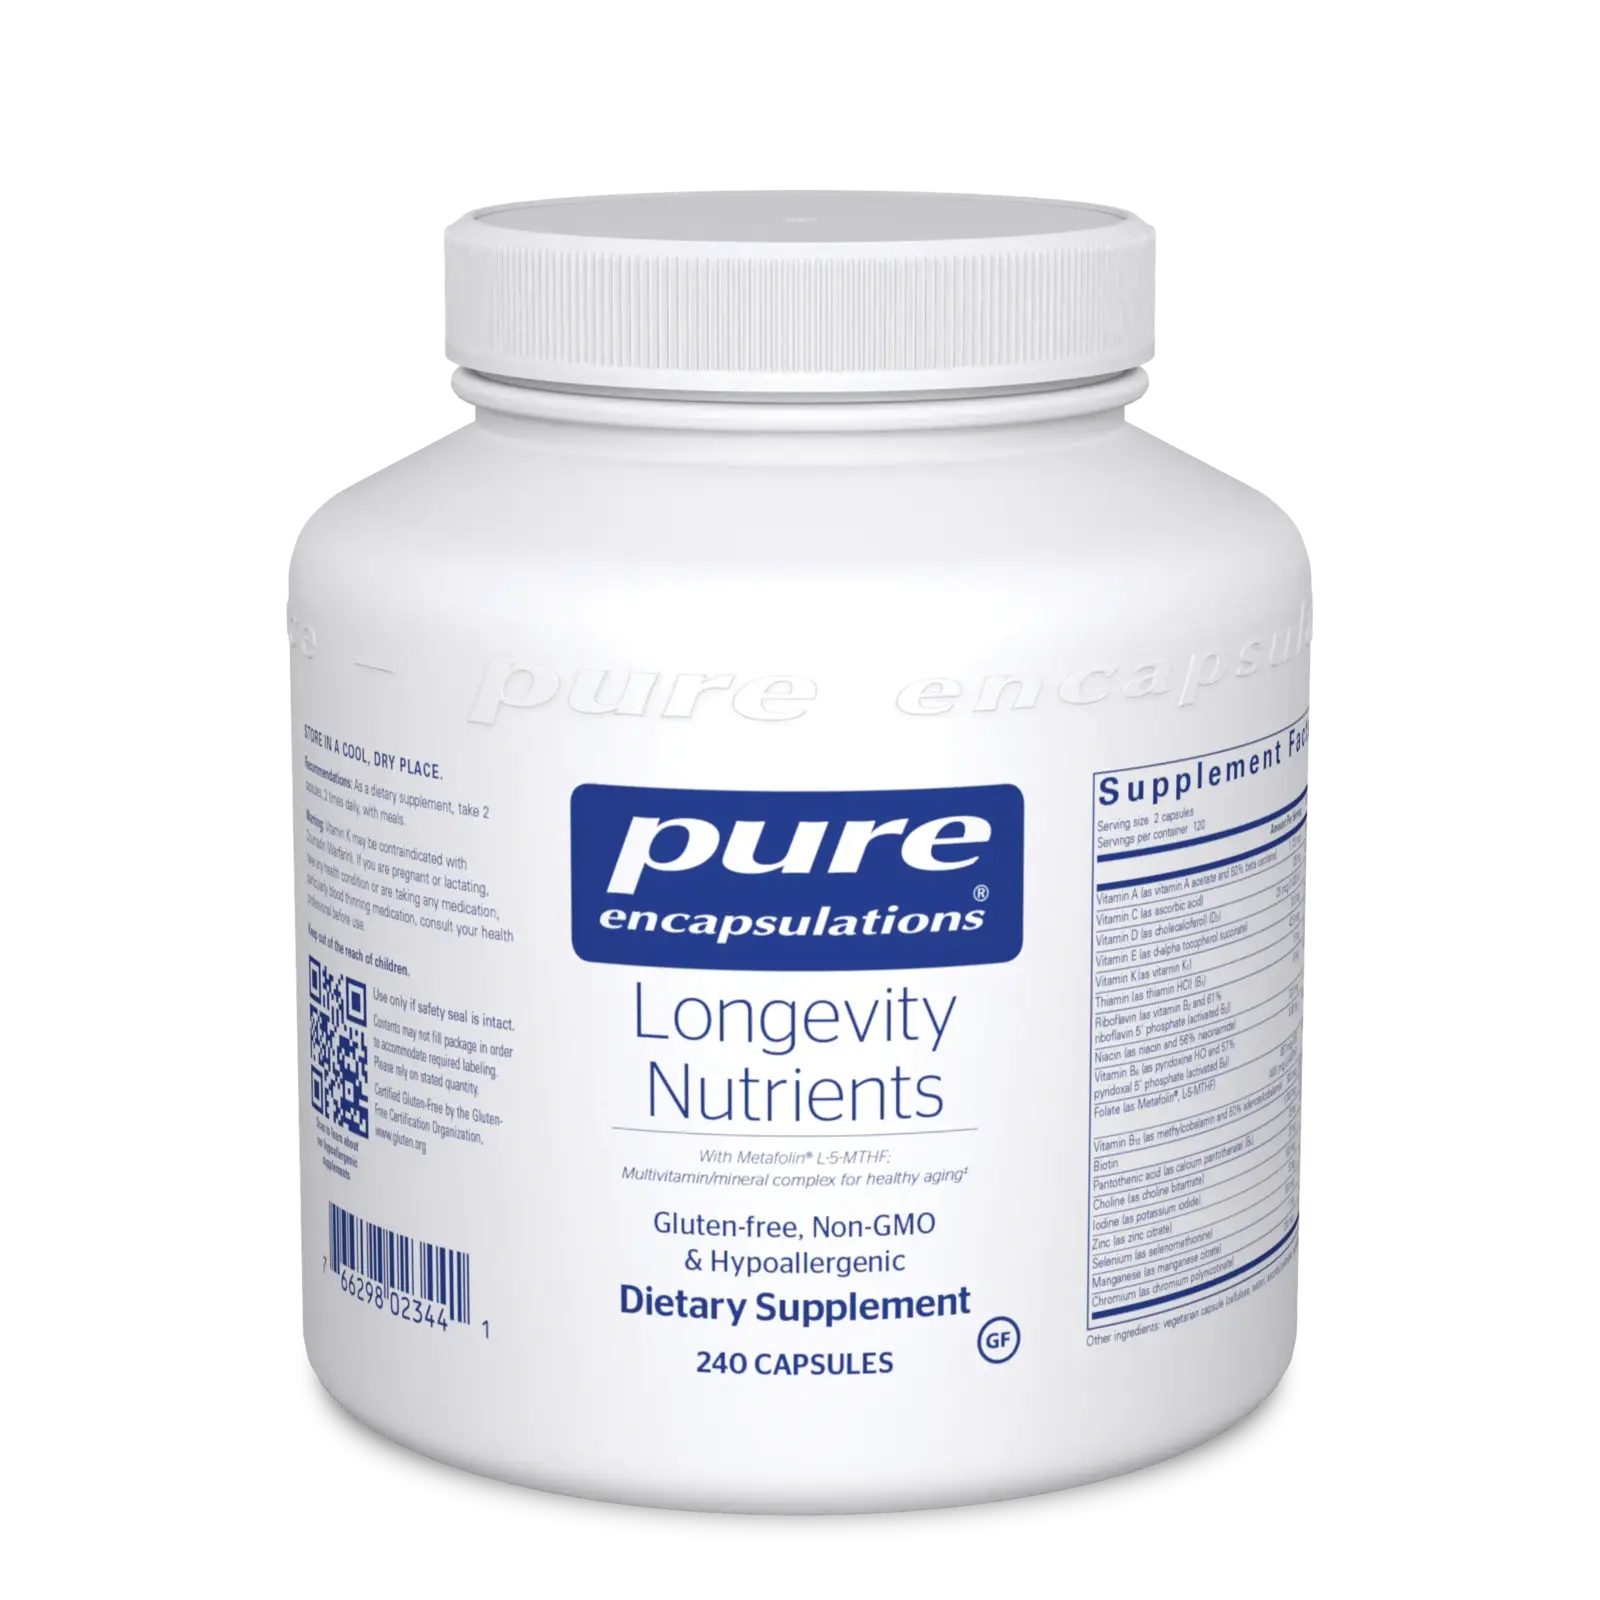 Longevity Nutrients (old price, combined with other variants)